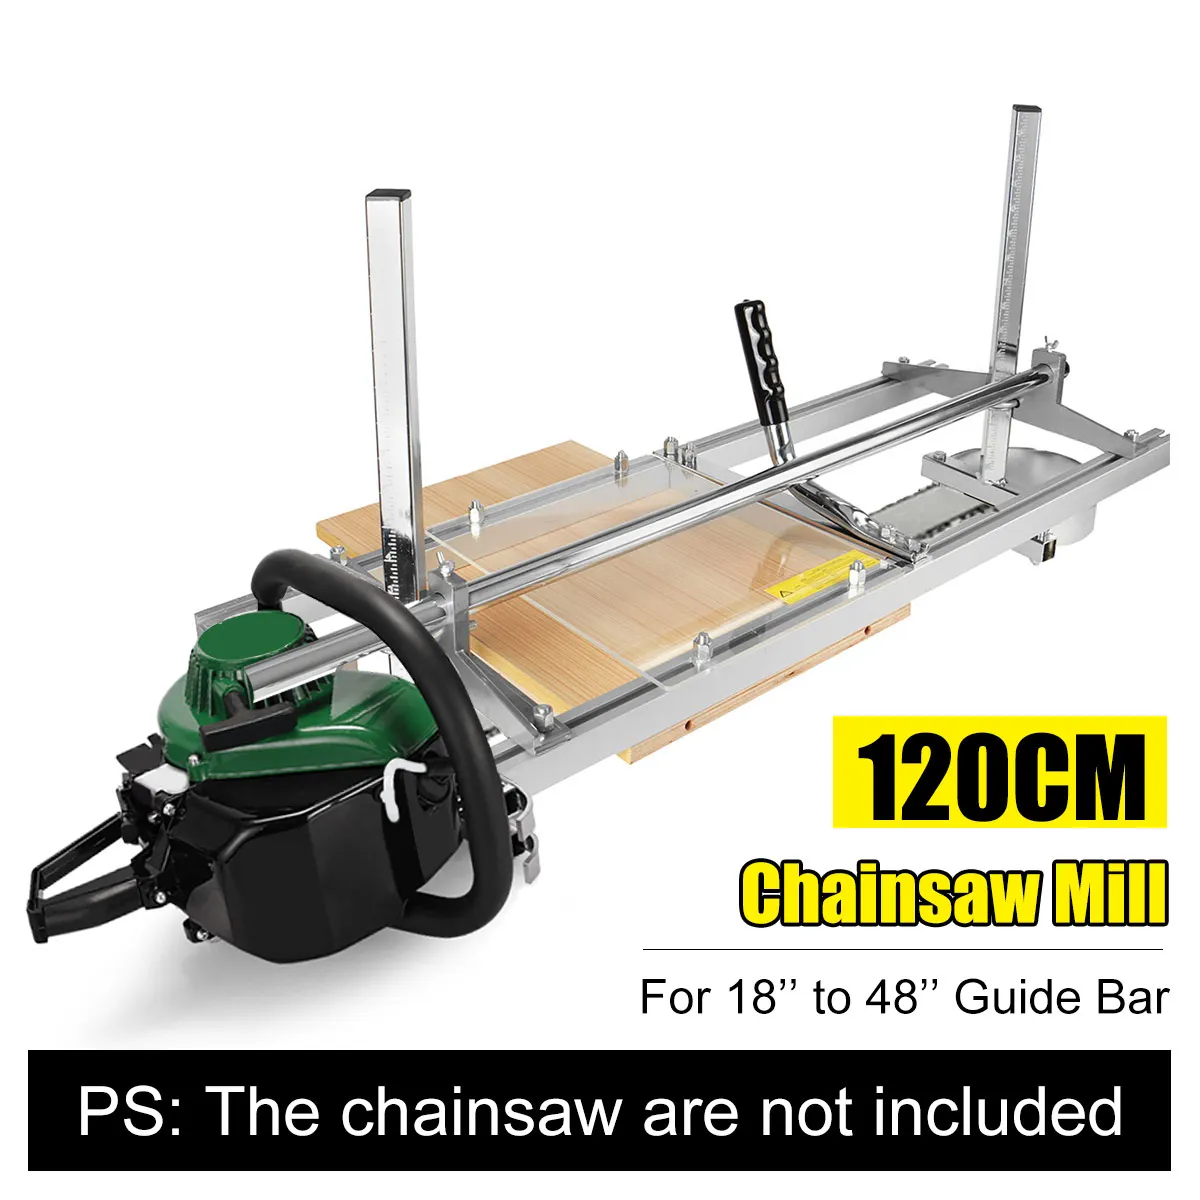 New Portable Chainsaw mill 48" Inch Planking Milling 18" to 48" Guide Bar Rack 